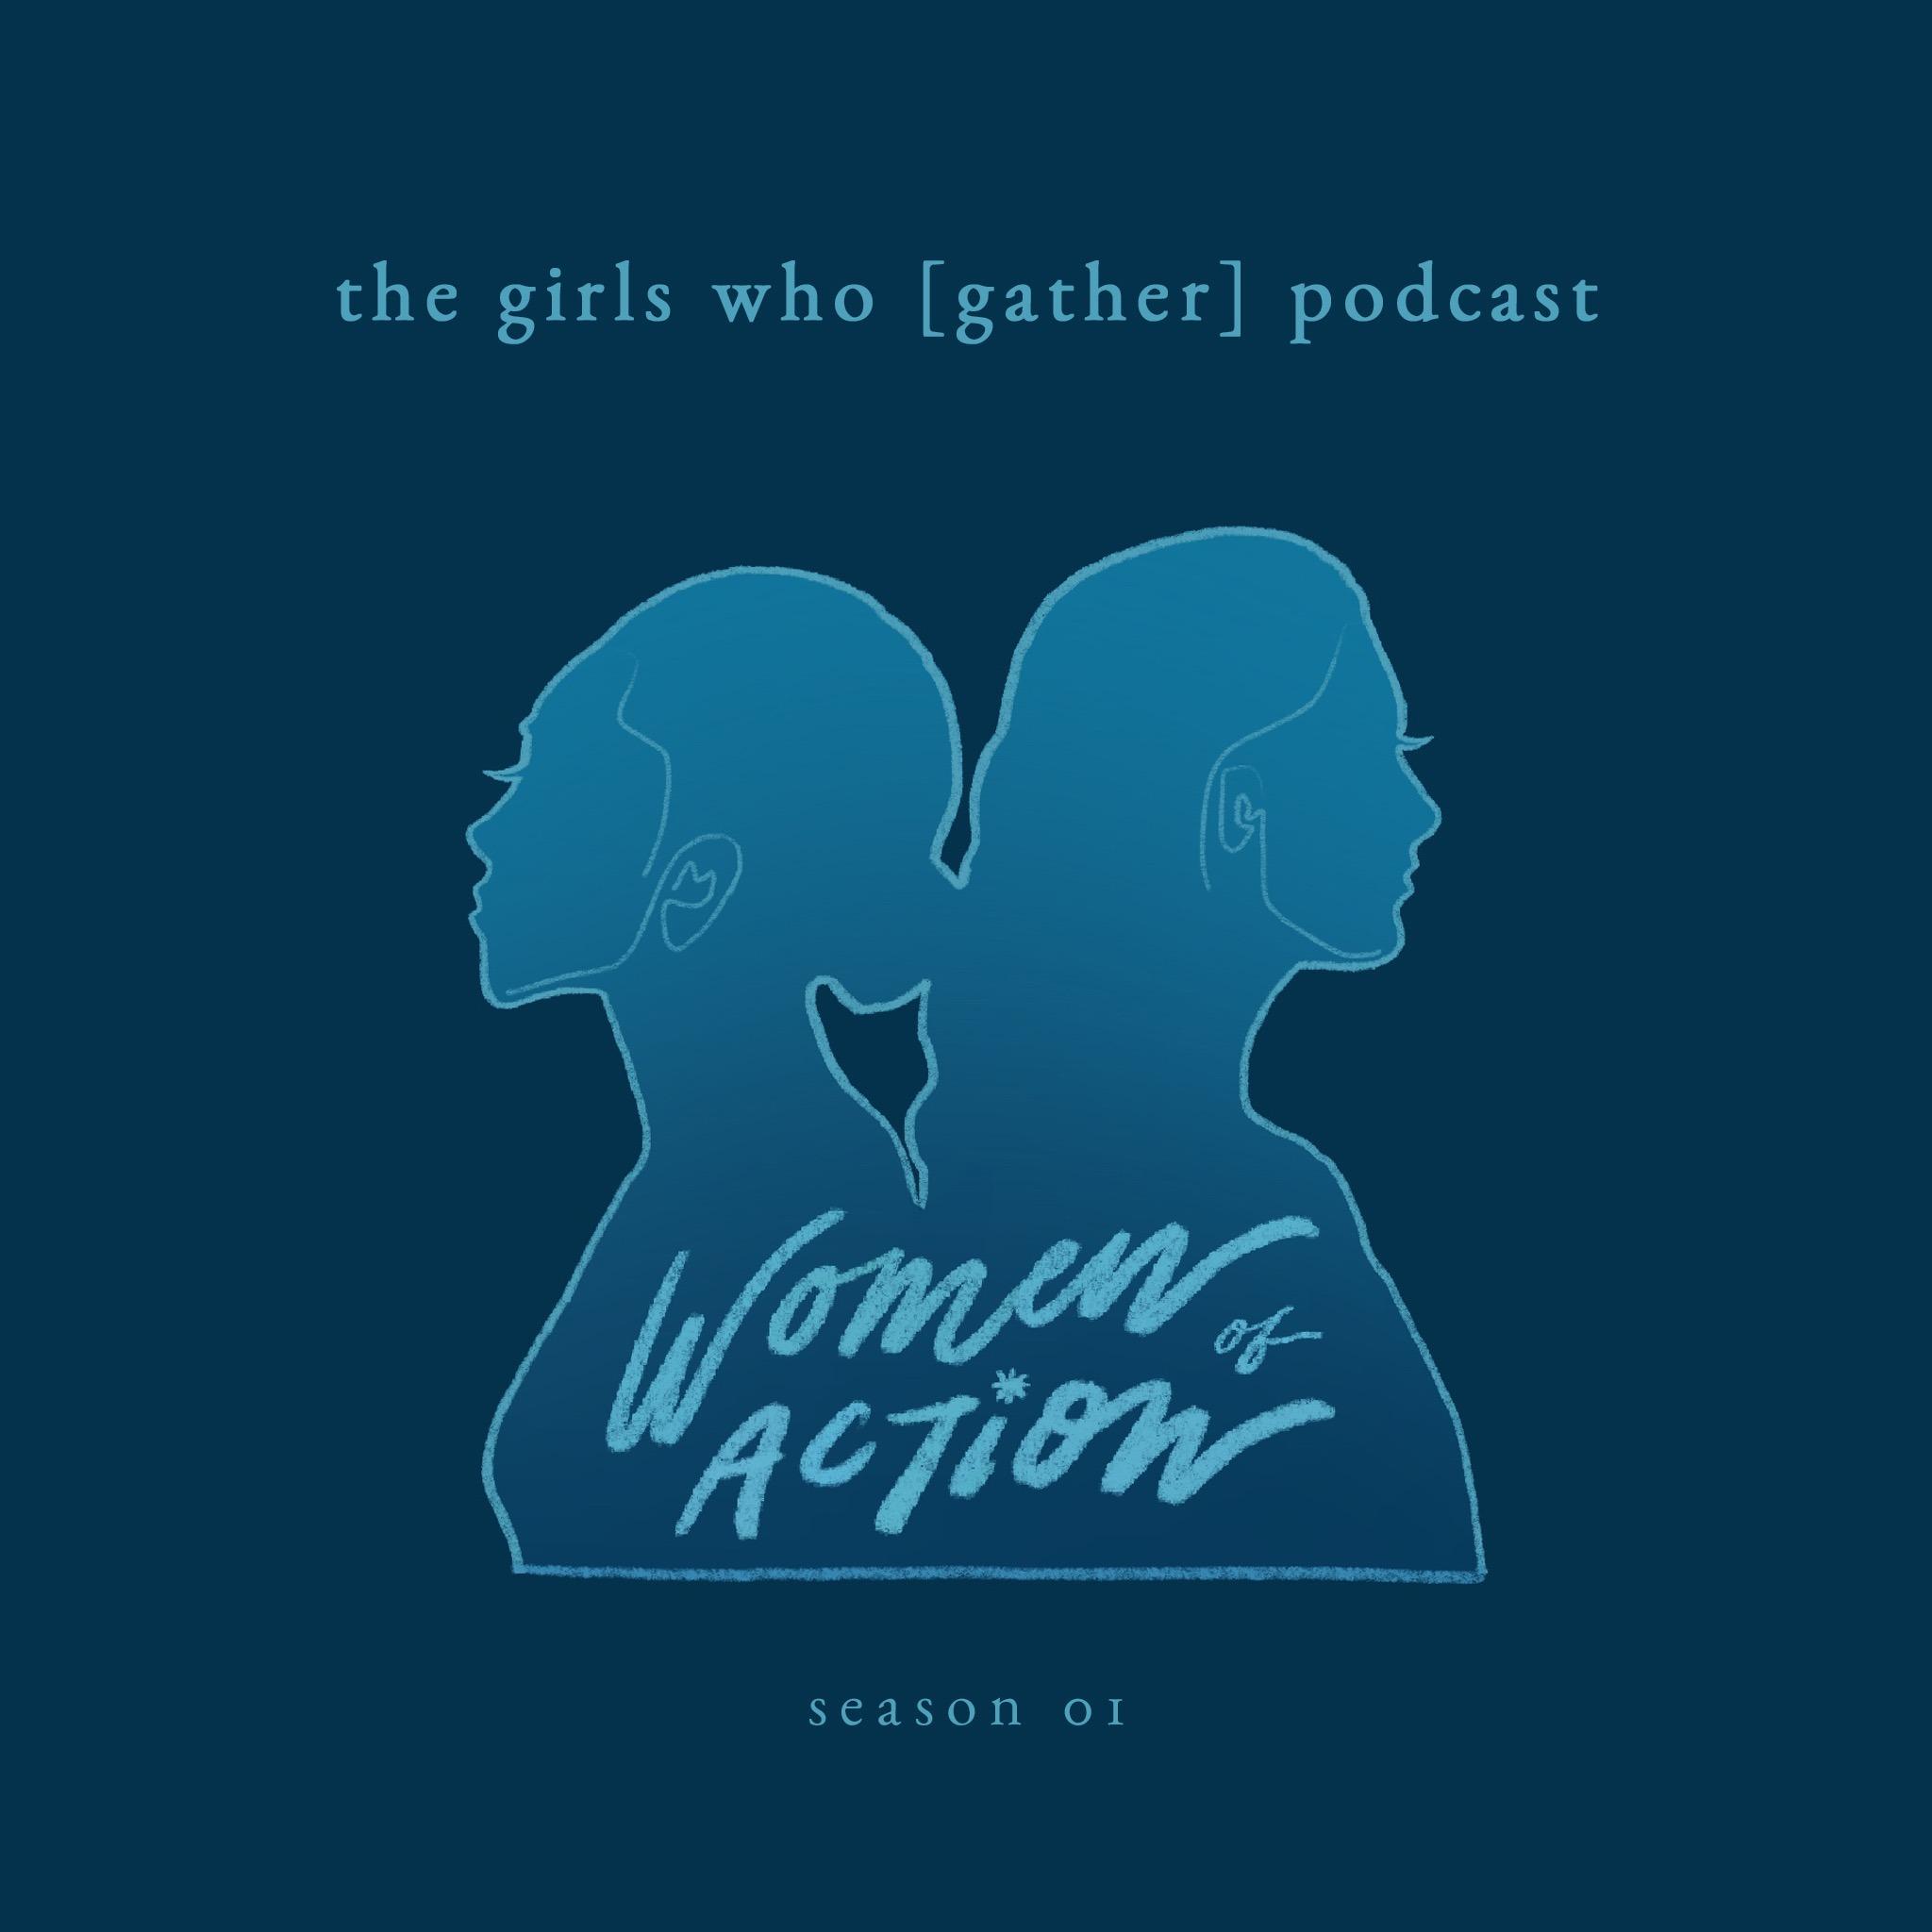 the girls who gather podcast